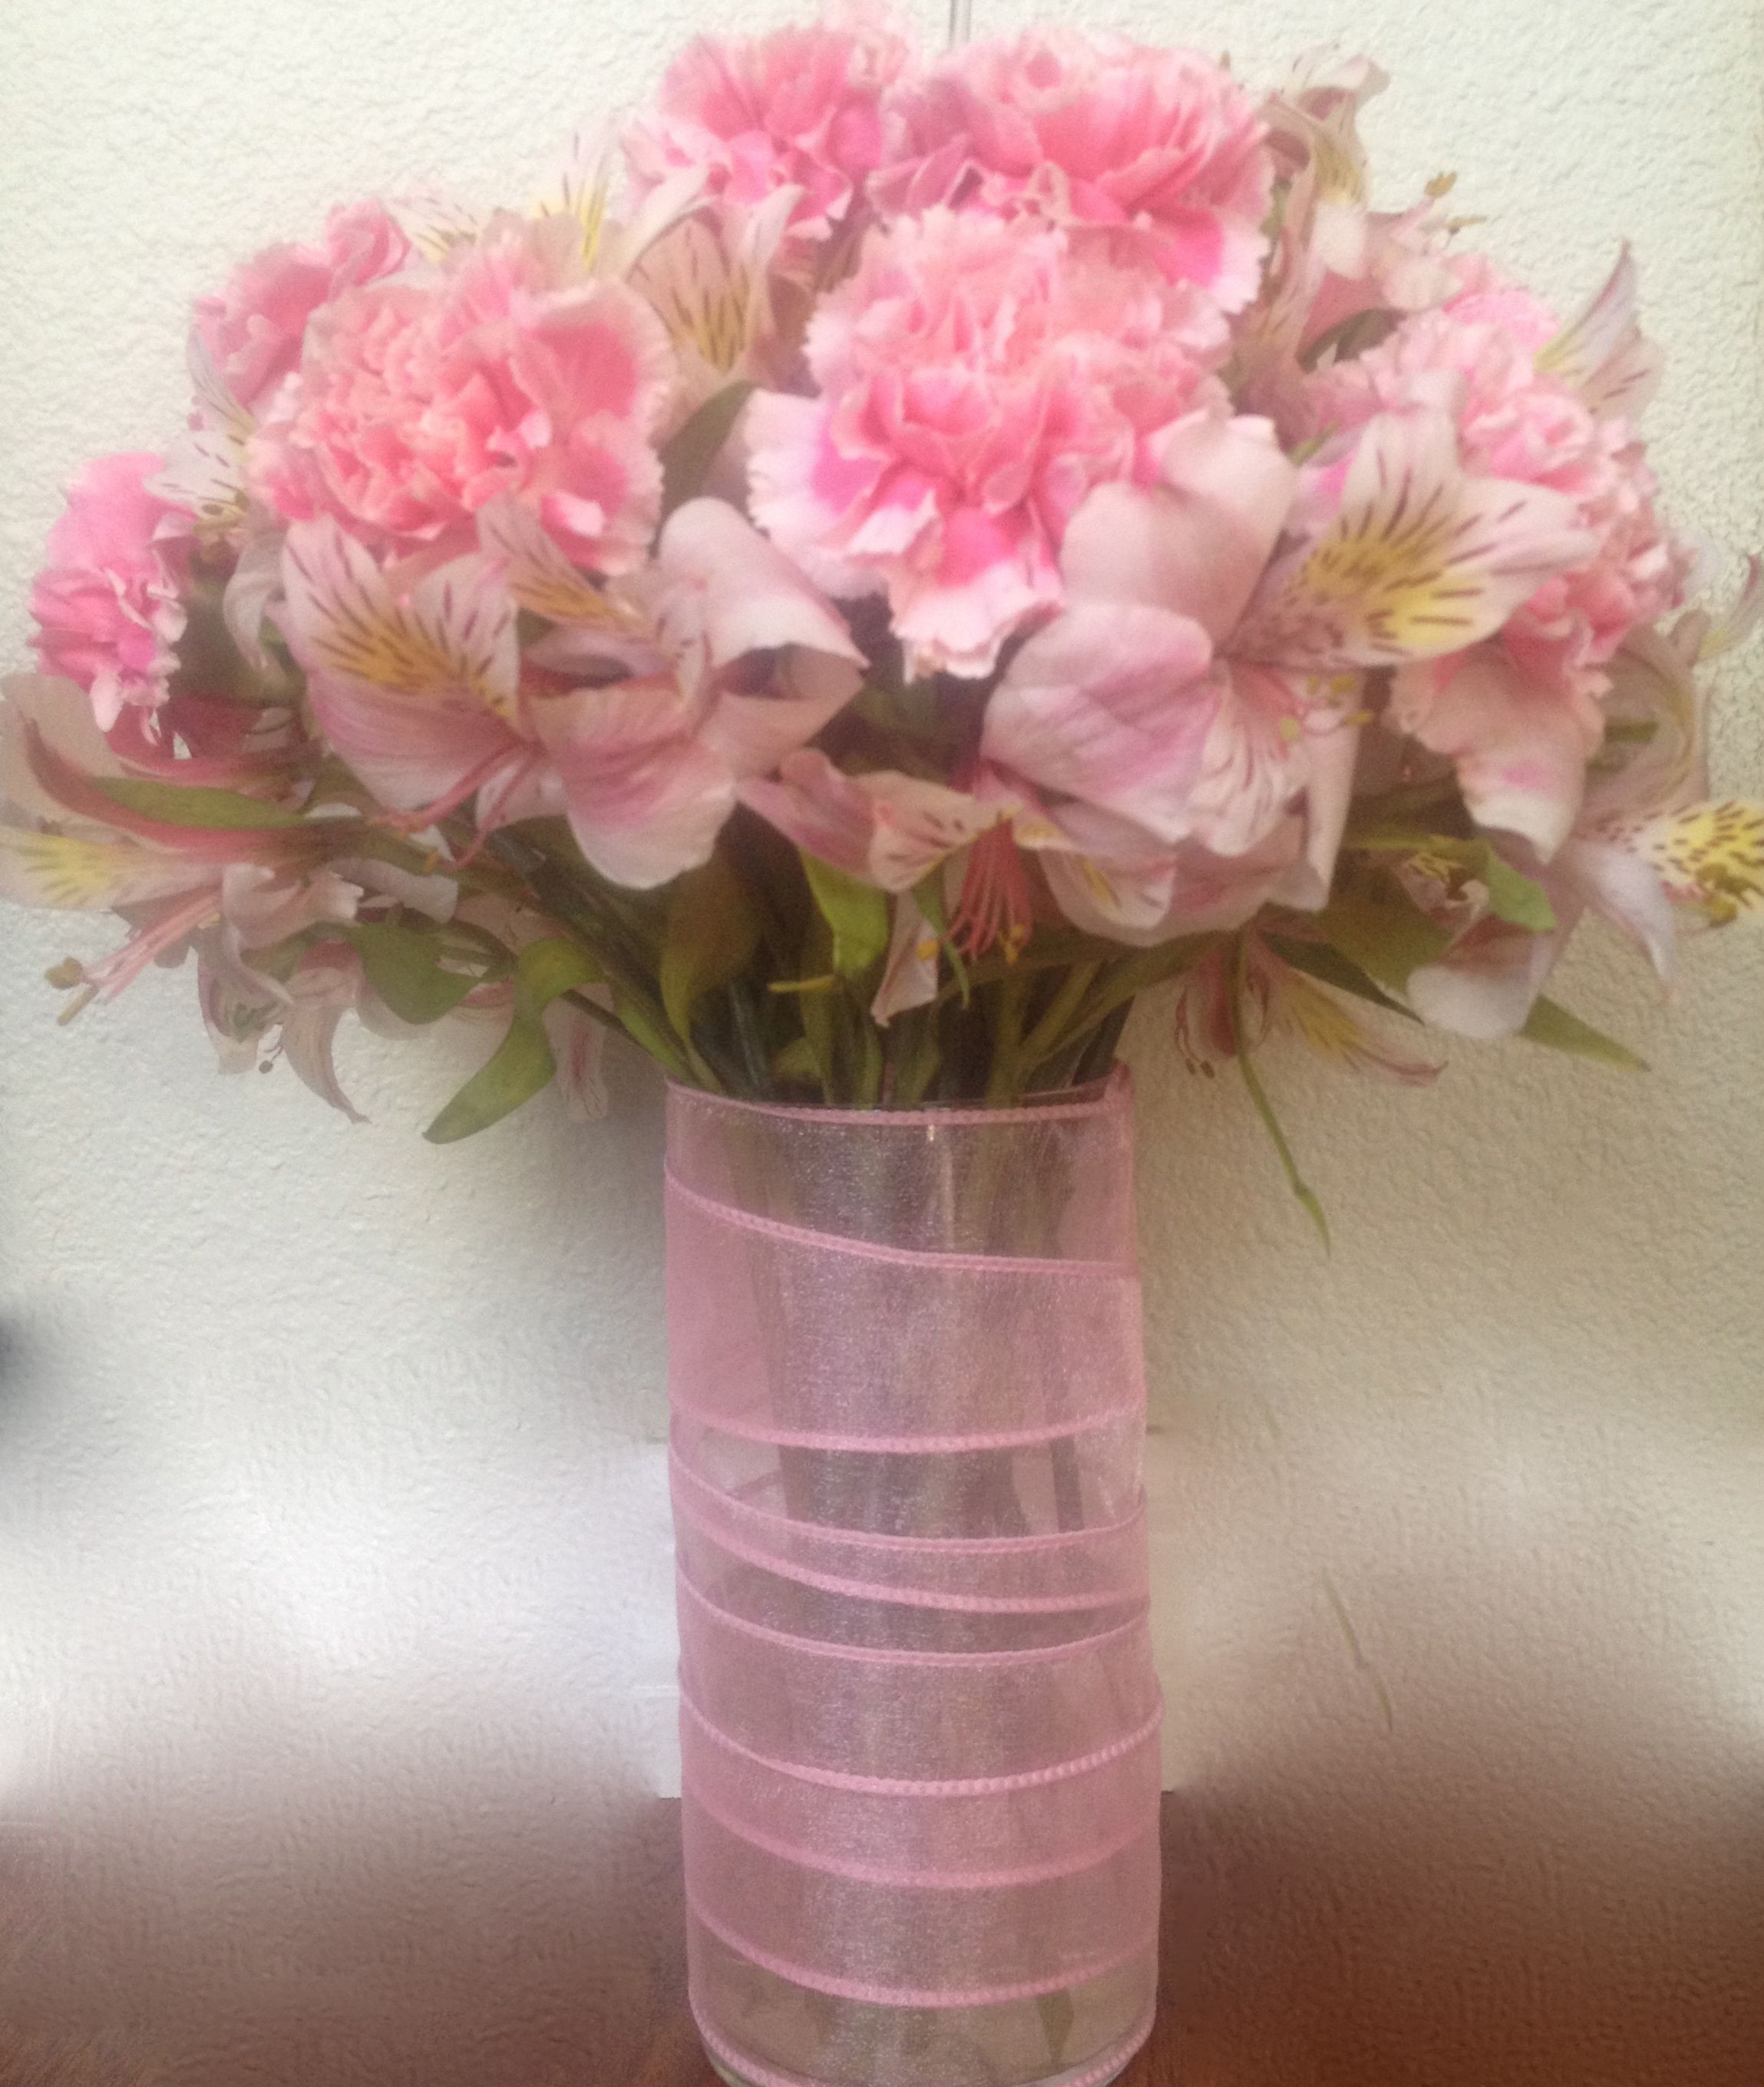 27 Wonderful Glass Vases for Flower Arrangements 2024 free download glass vases for flower arrangements of its a girl pink carnations alstroemeria in a glass vase wrapped intended for pink carnations alstroemeria in a glass vase wrapped in pink ribbon